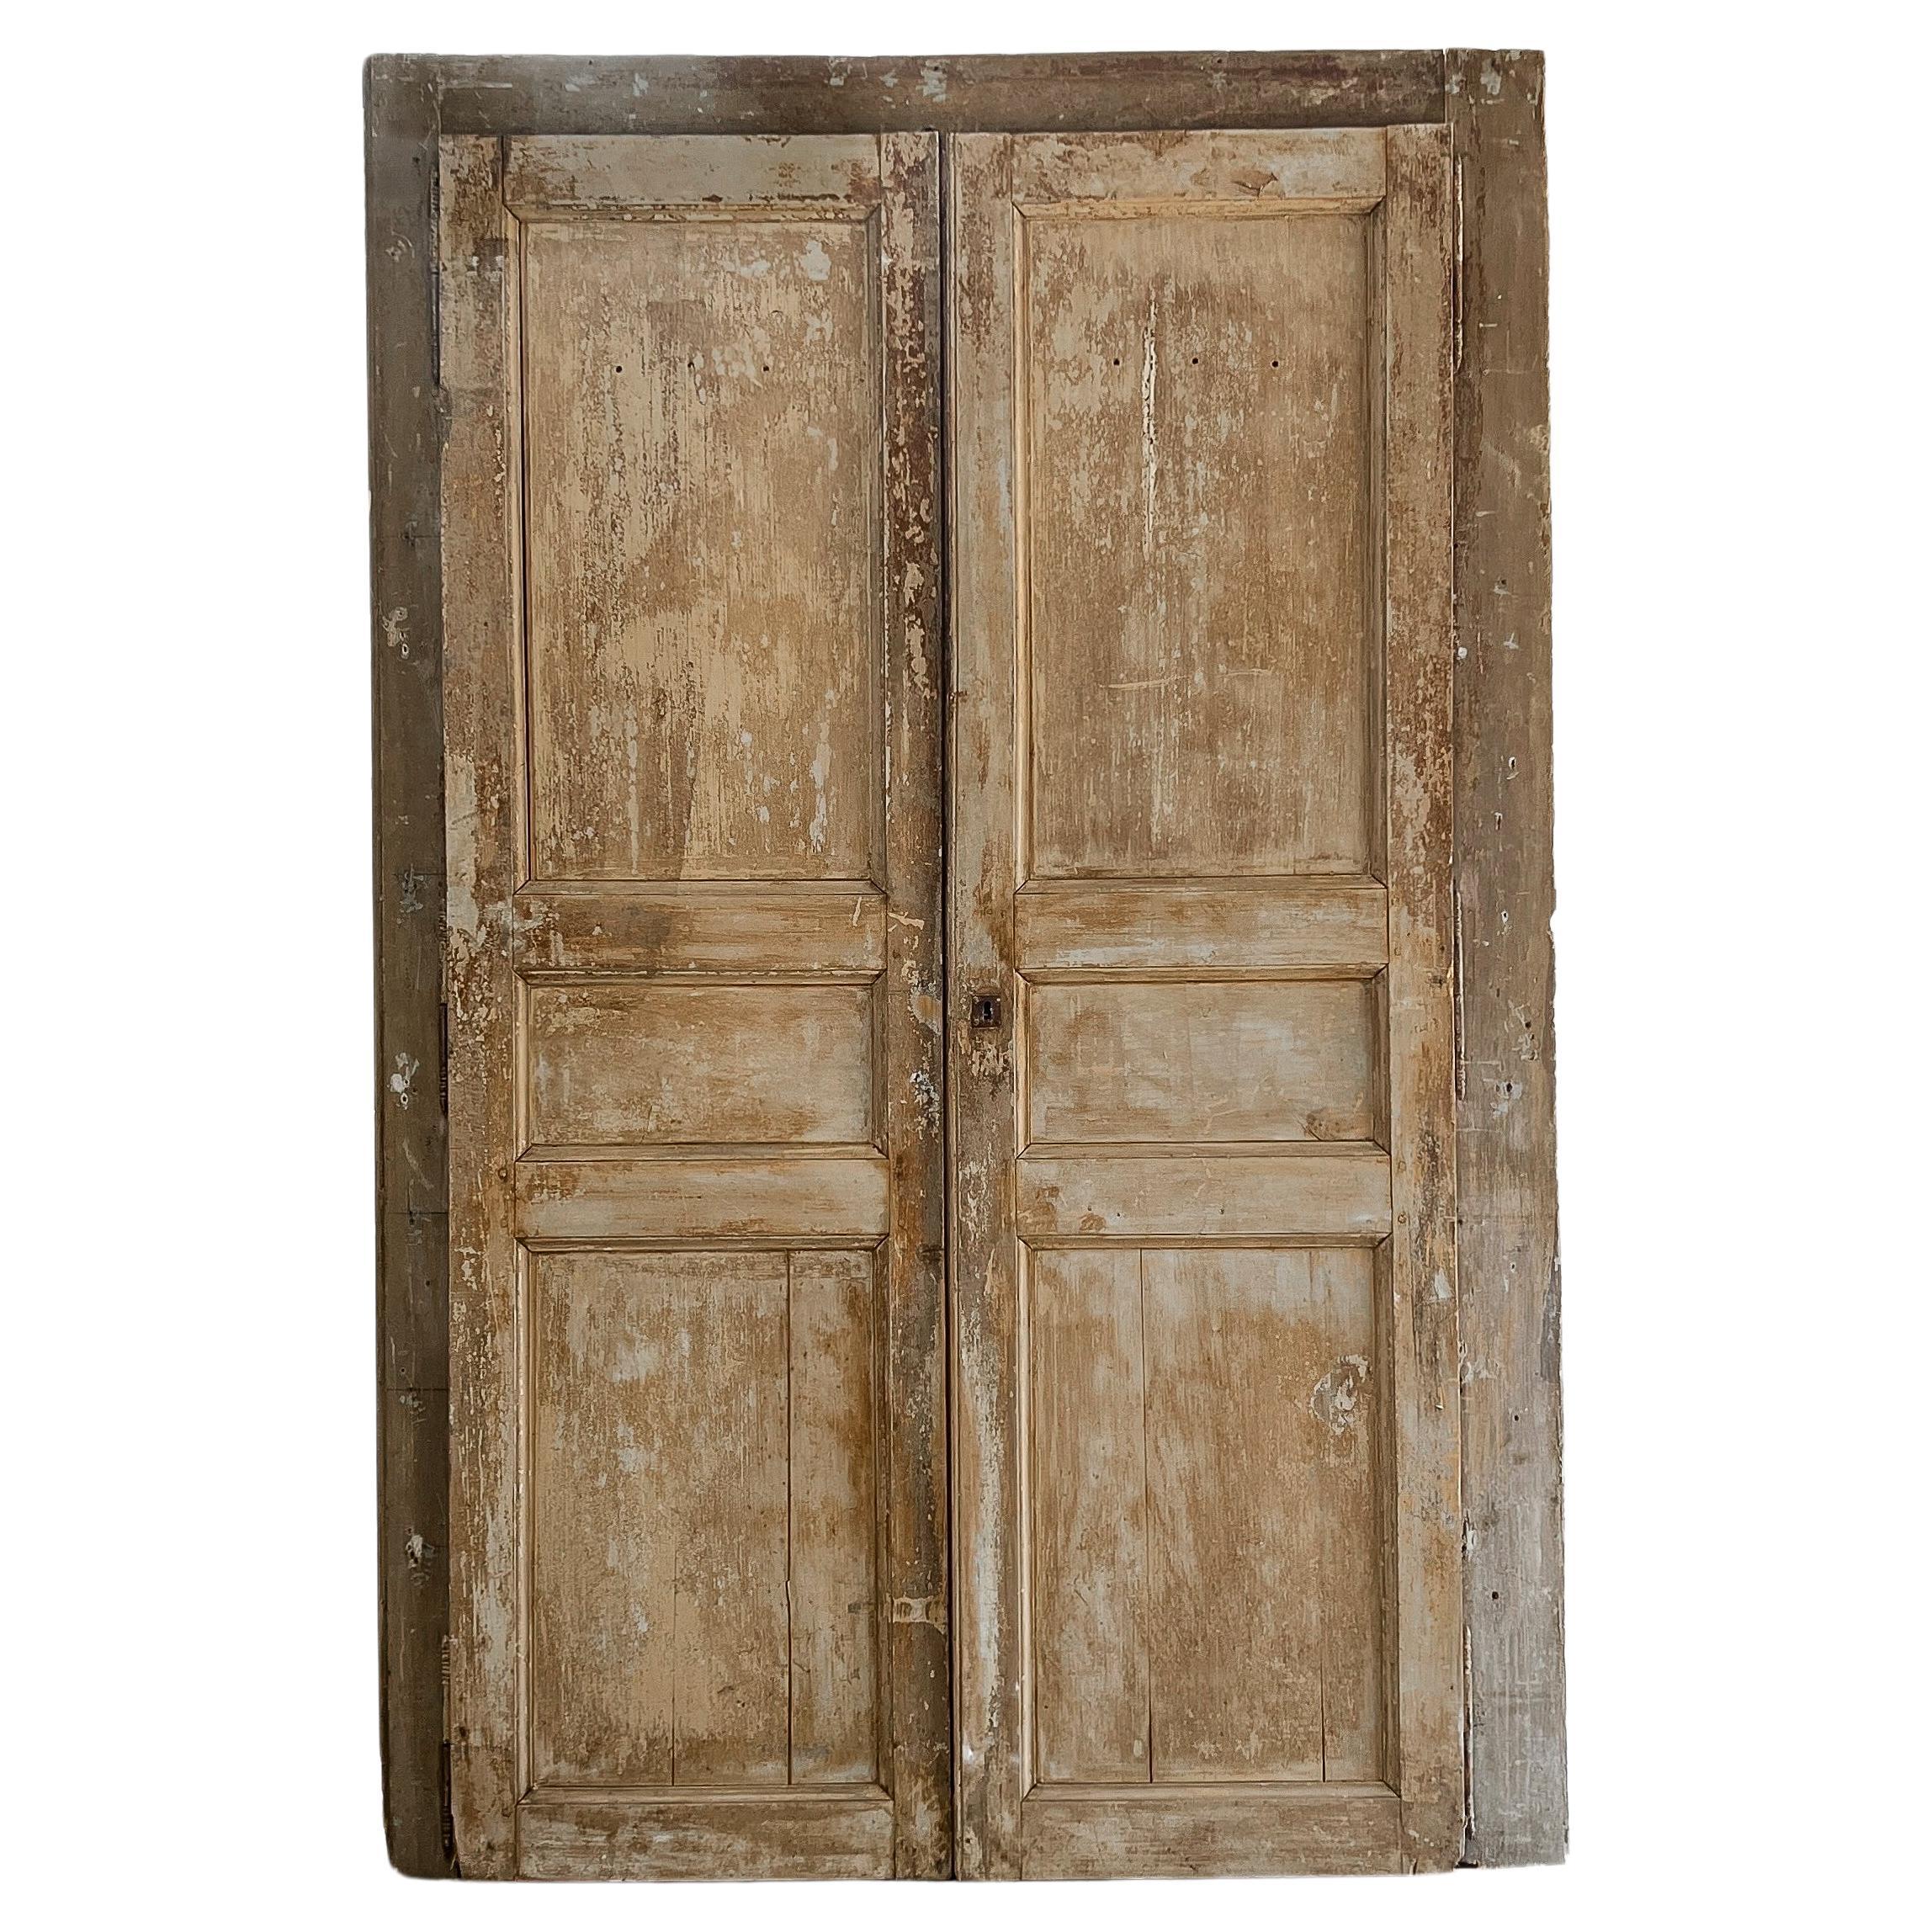 Pair of 19th Century 3 Panel French Doors in Casing